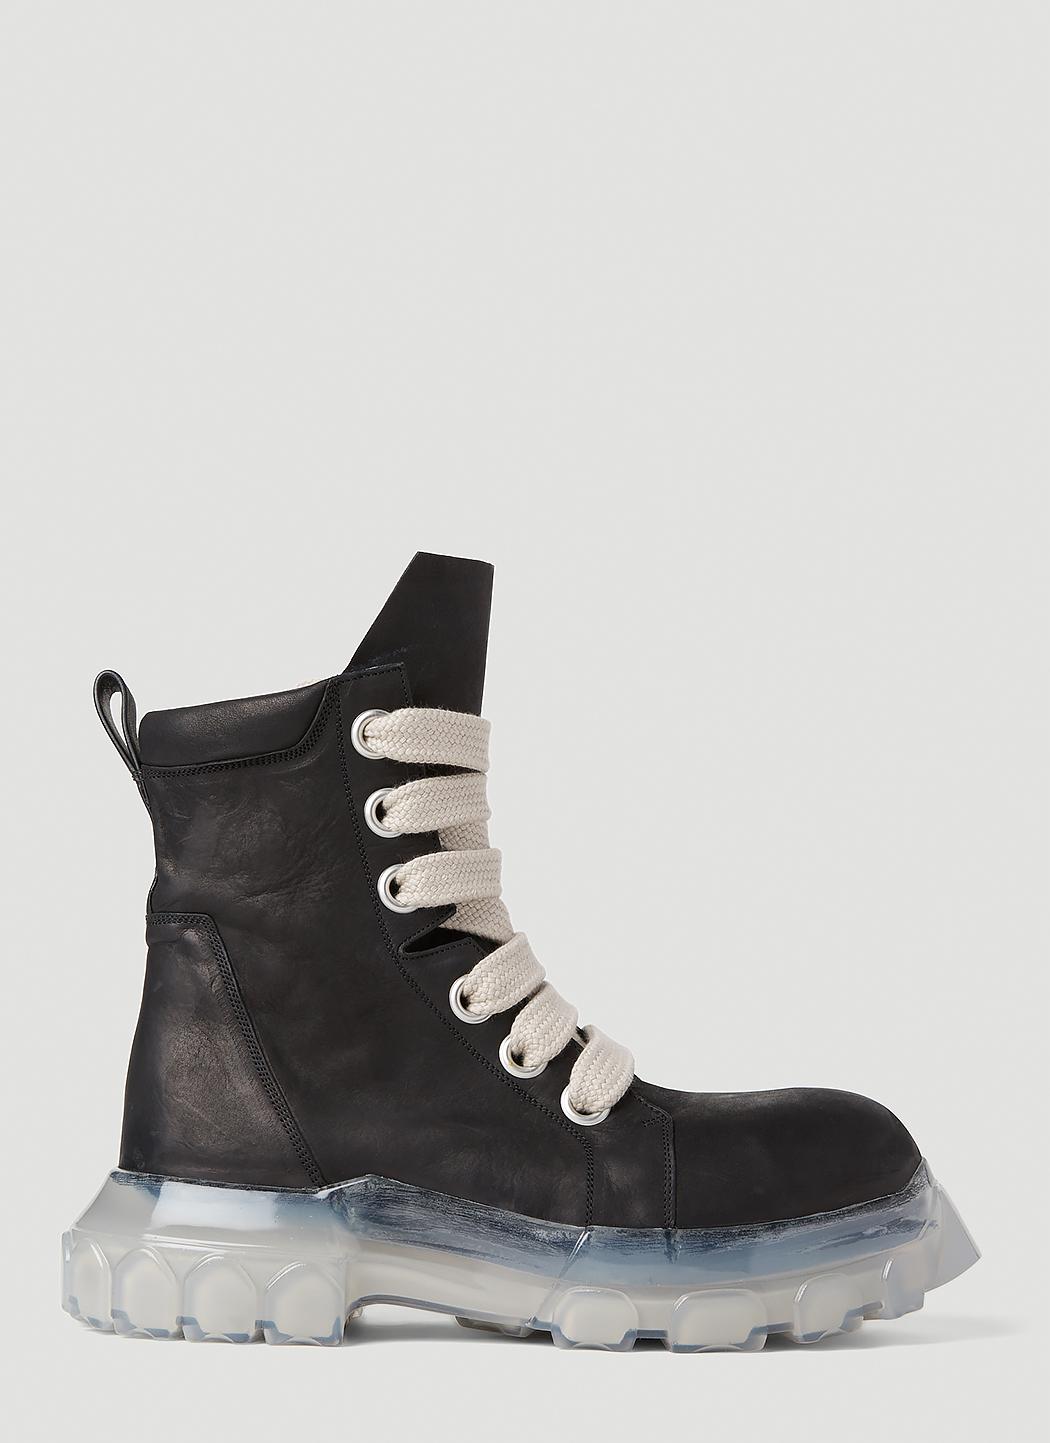 Rick Owens Bozo Tractor Boots in Black for Men | Lyst